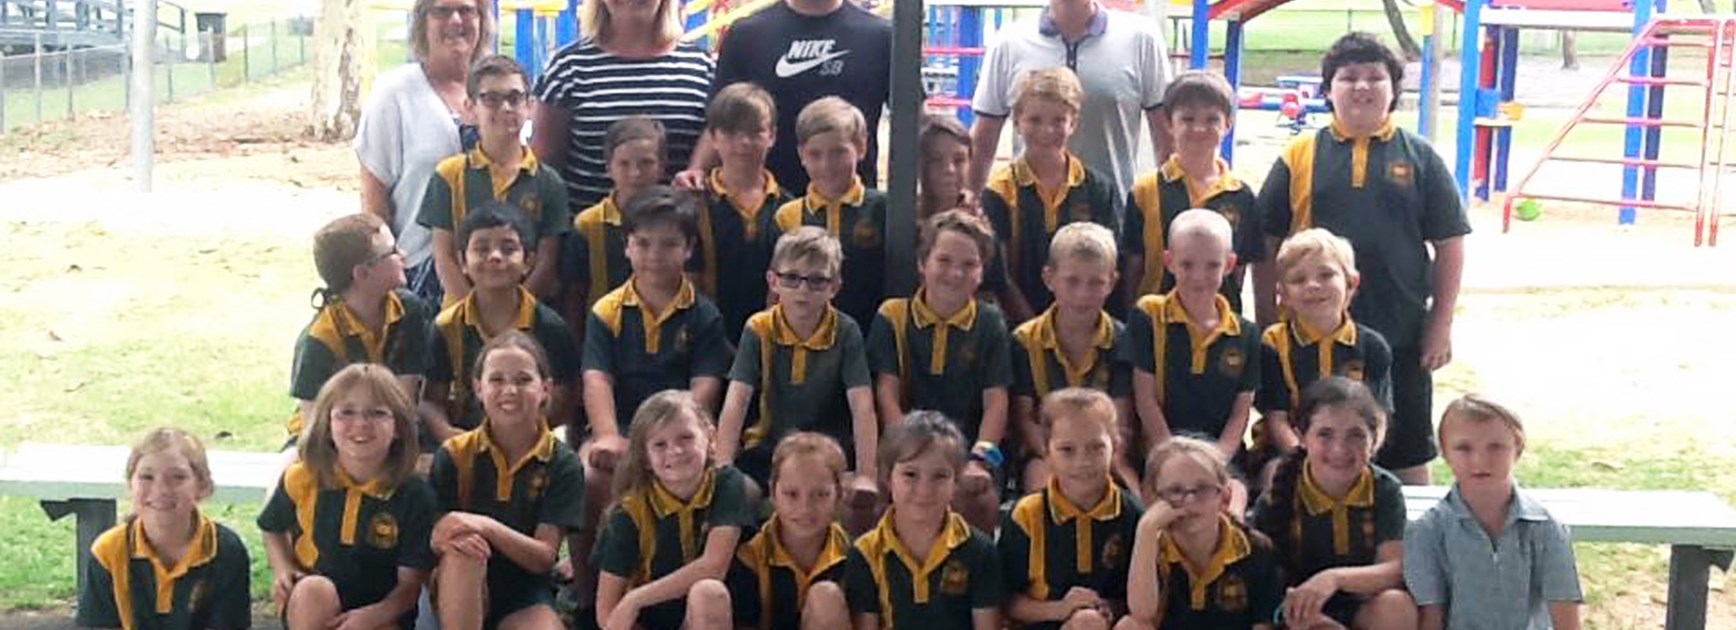 Students and teachers at Walloon State School got a shock when Maroons captain Cameron Smith paid them a visit on Monday.